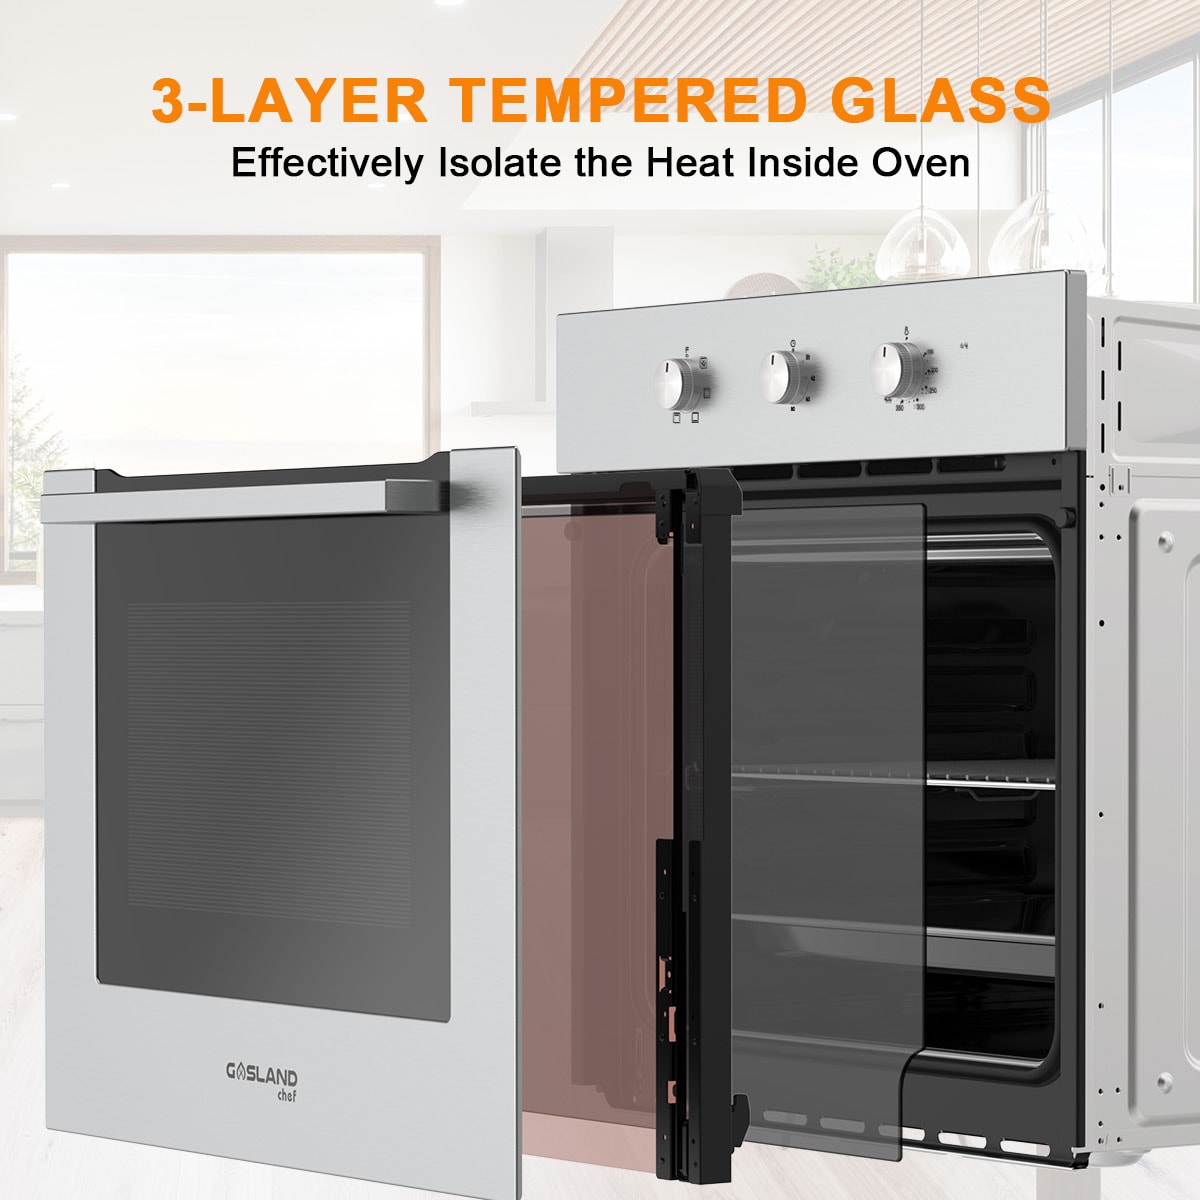 thermomate Electric Single Wall Oven | 9 Cooking Functions, 3-Layer Tempered Glass Door, Easy to Clean | 24-Inch - Silver